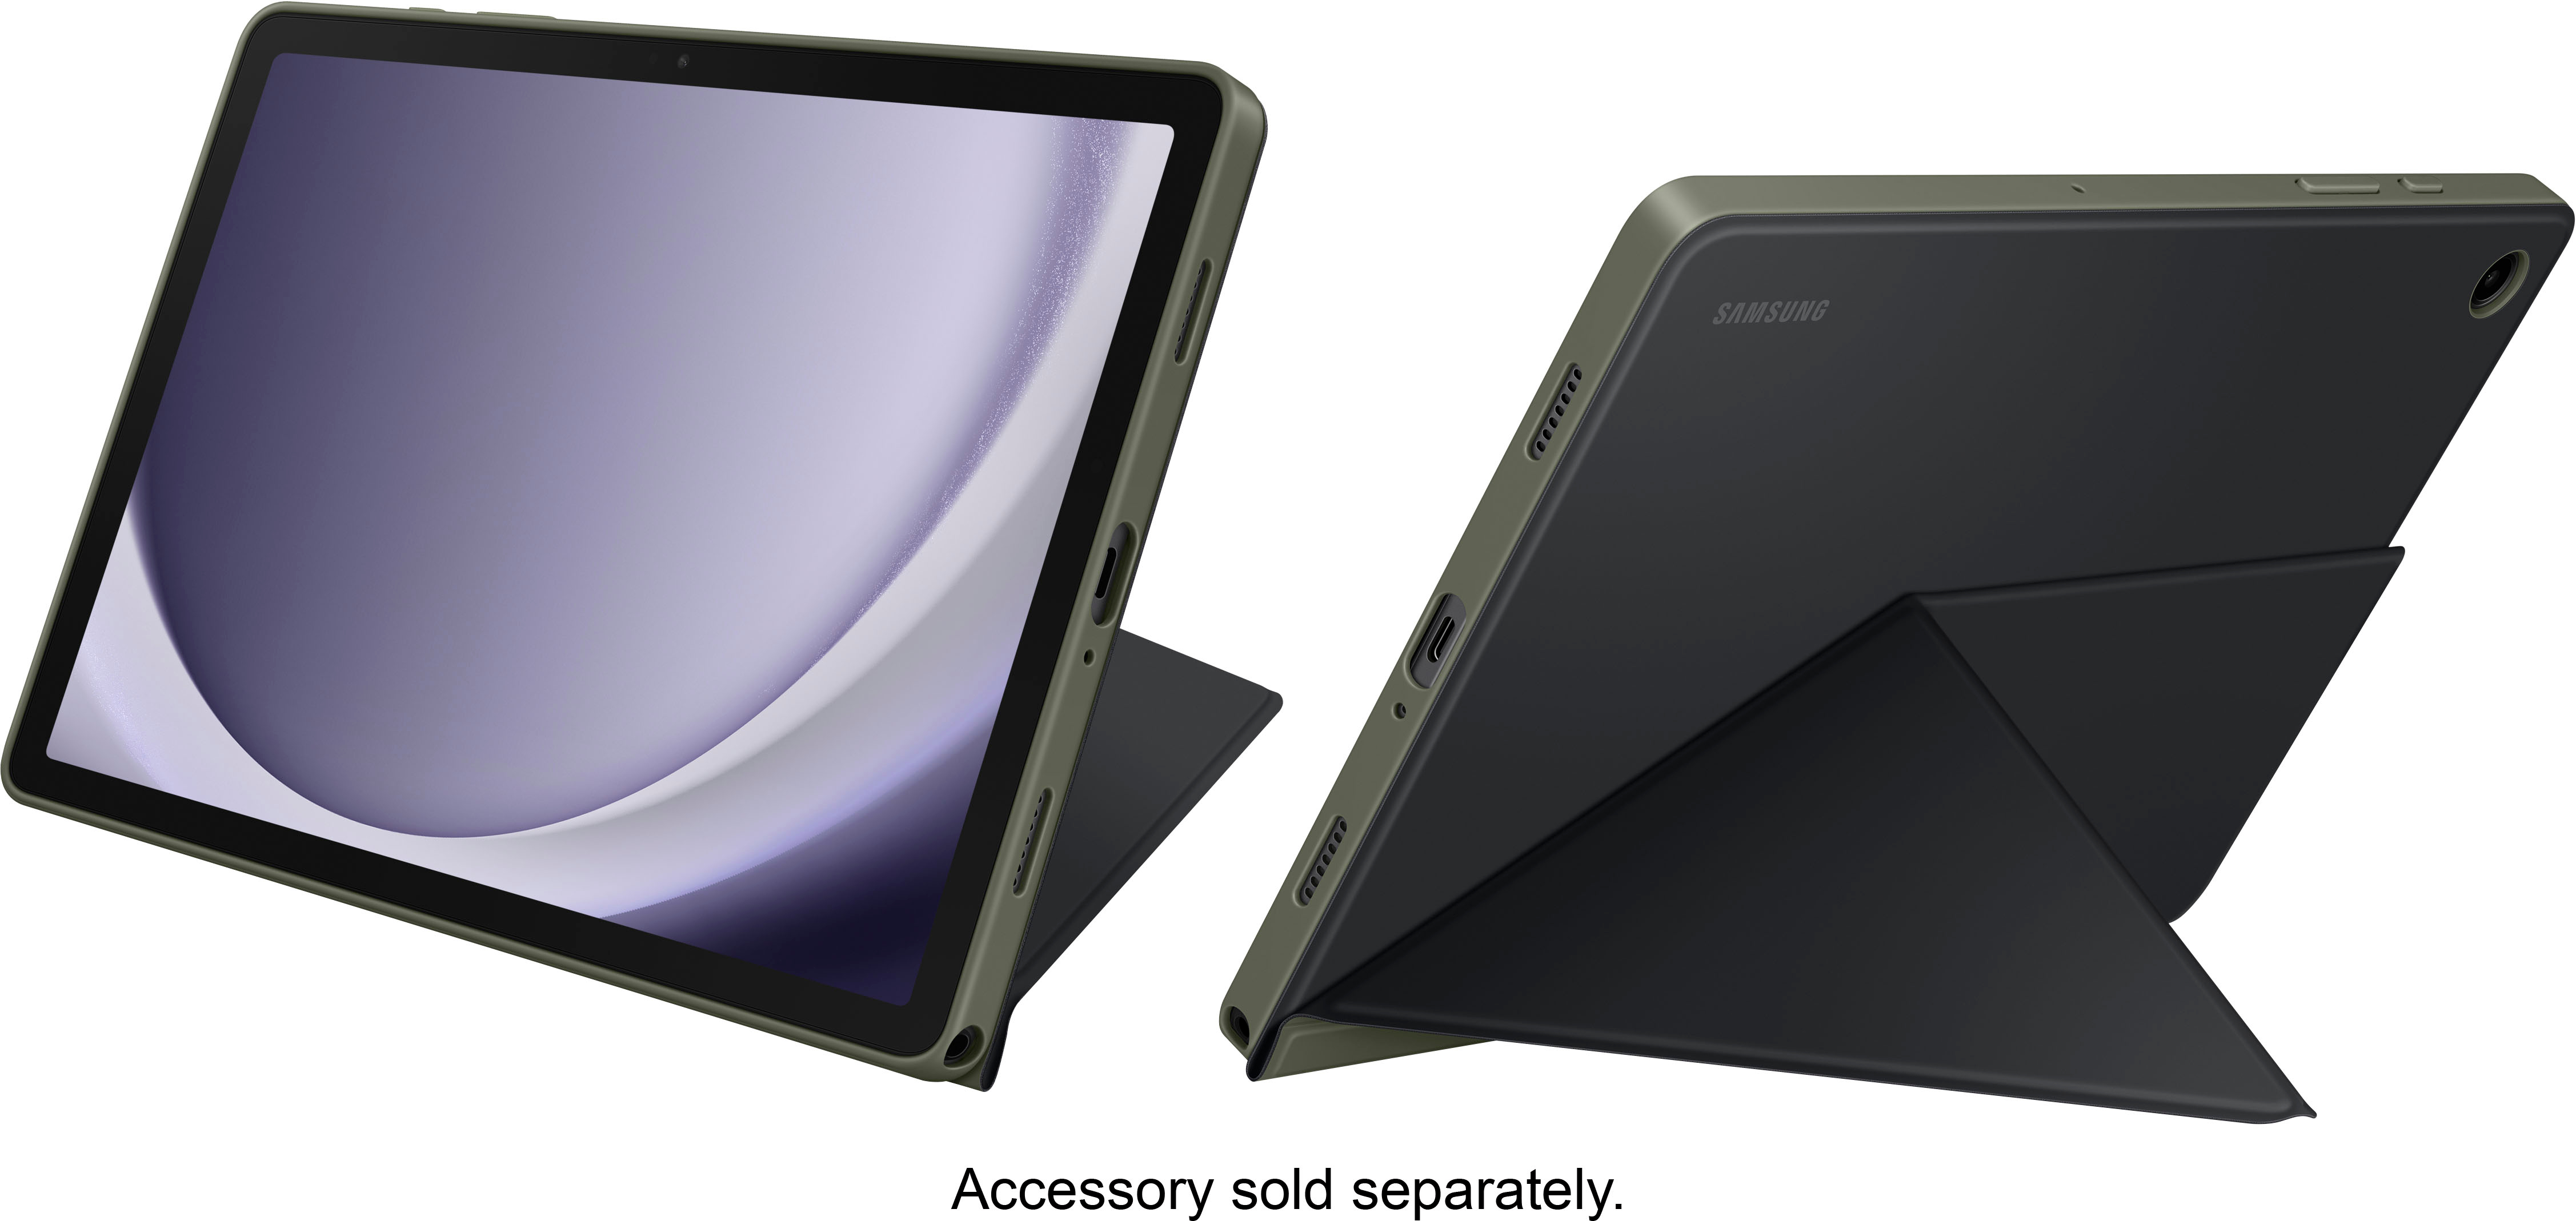 Samsung's new Galaxy Tab A9 series is your best shot at cheap big